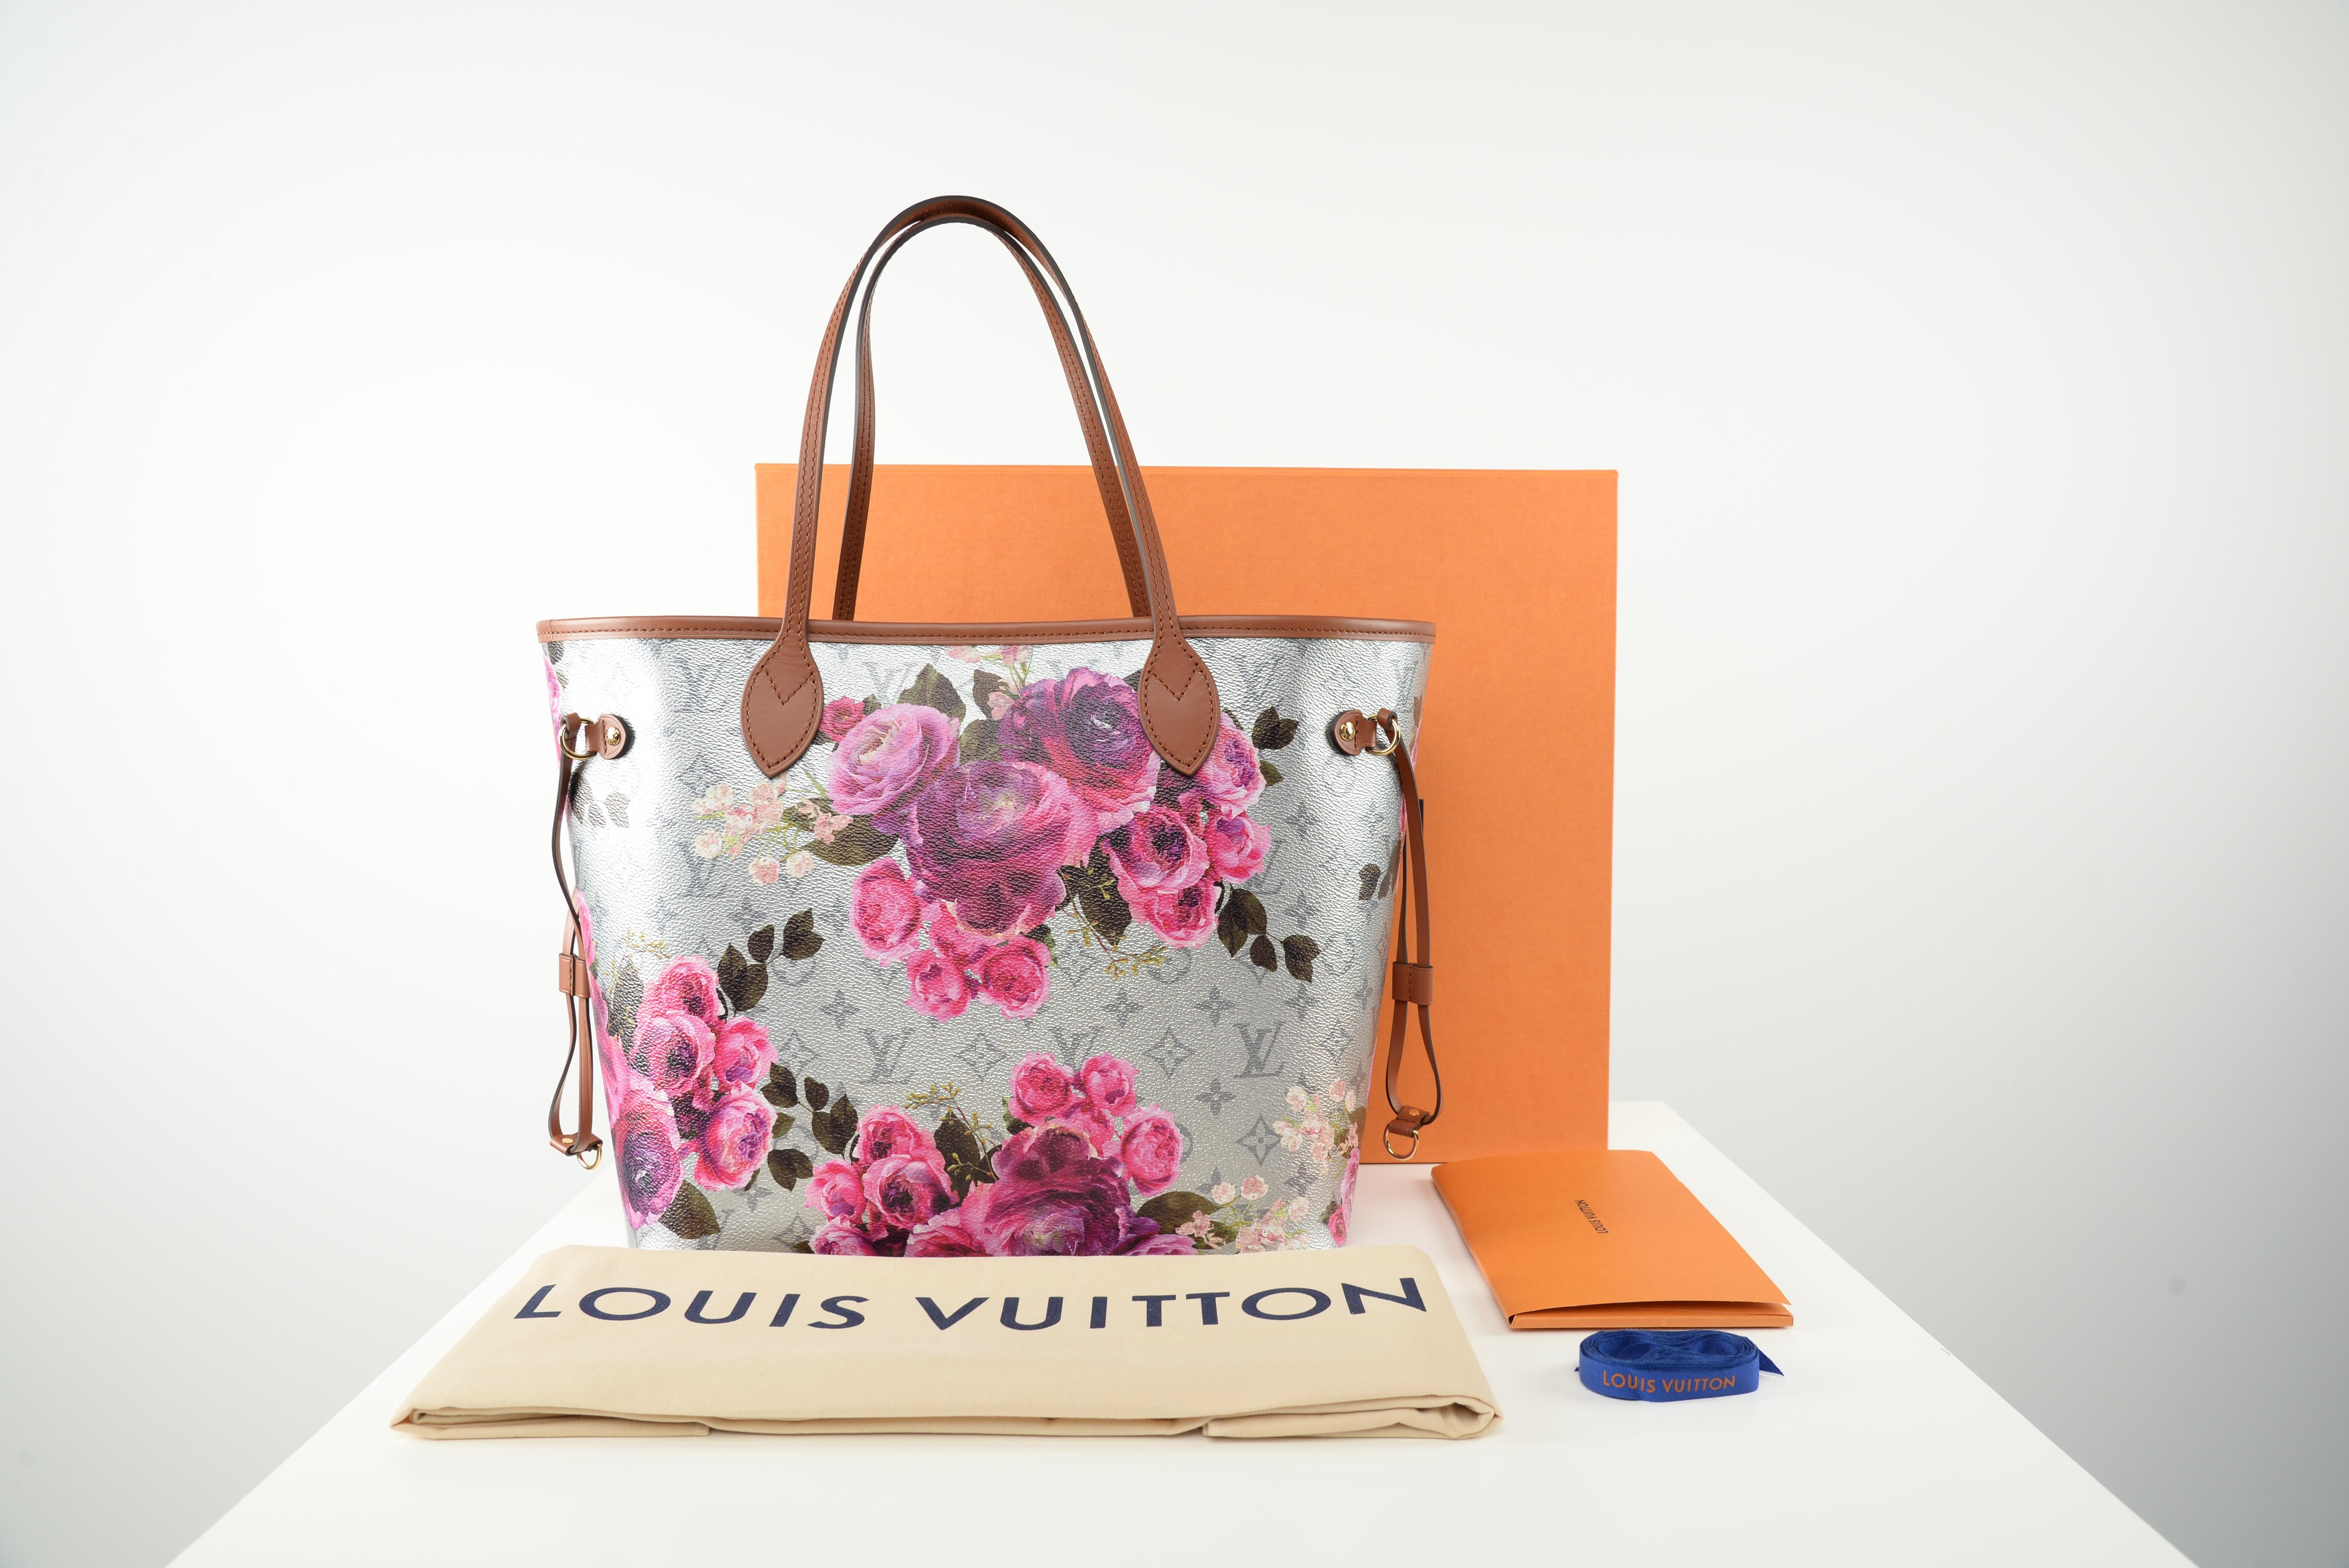 From the collection of SAVINETI we offer this Louis Vuitton Neverfull MM Garden:
-	Brand: Louis Vuitton
-	Model: Neverfull MM Garden Capsule
-	Year: 2022 
-	Condition: NEW (unused)
-	Materials: coated canvas, leather, gold-color hardware
-	Extras: